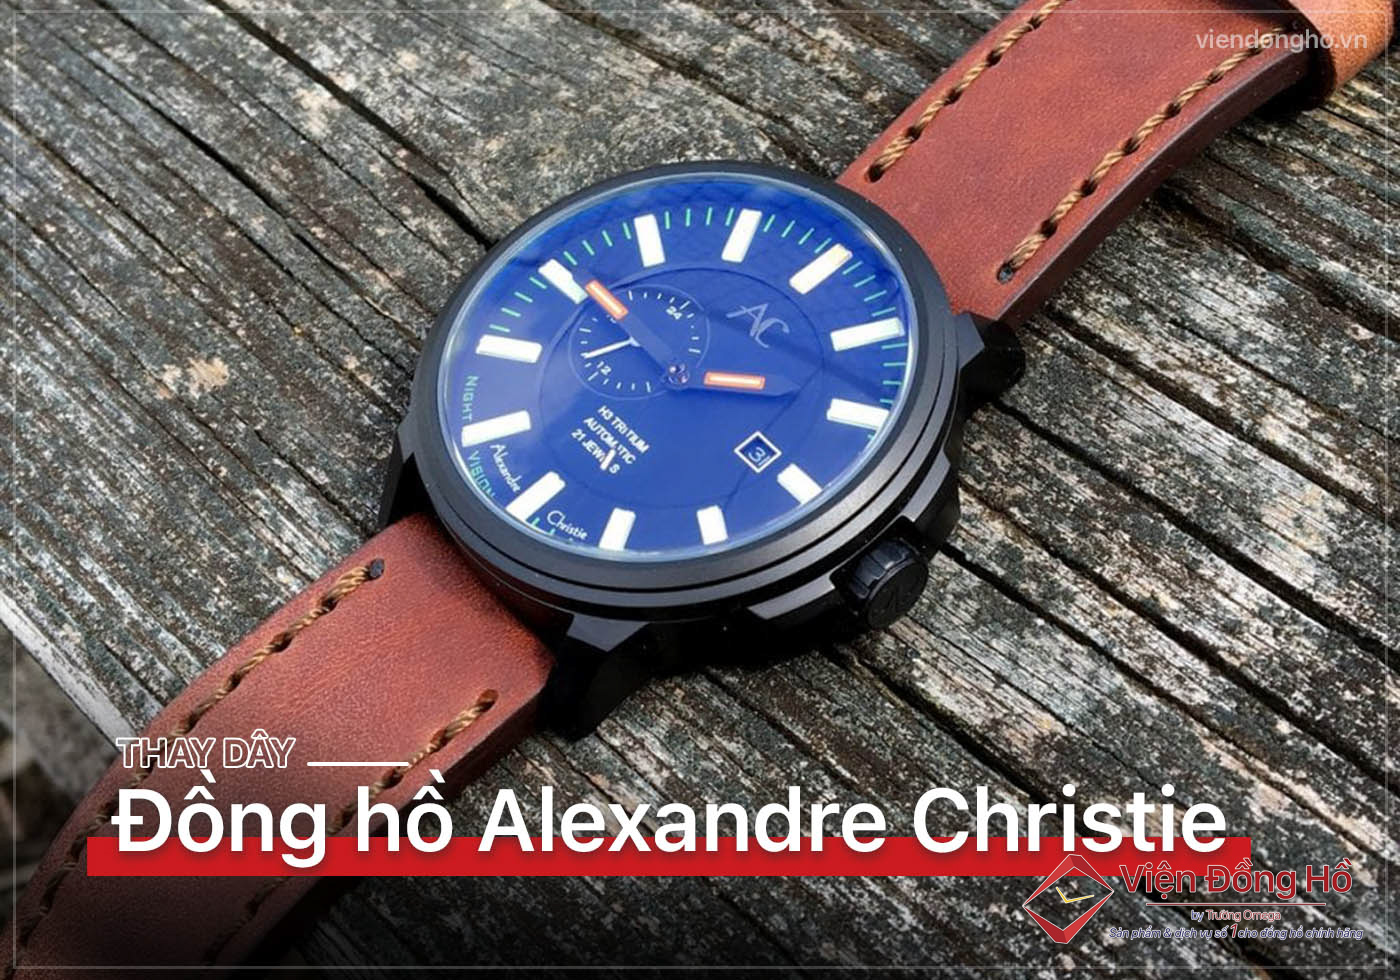 Thay day dong ho Alexandre Christie 5